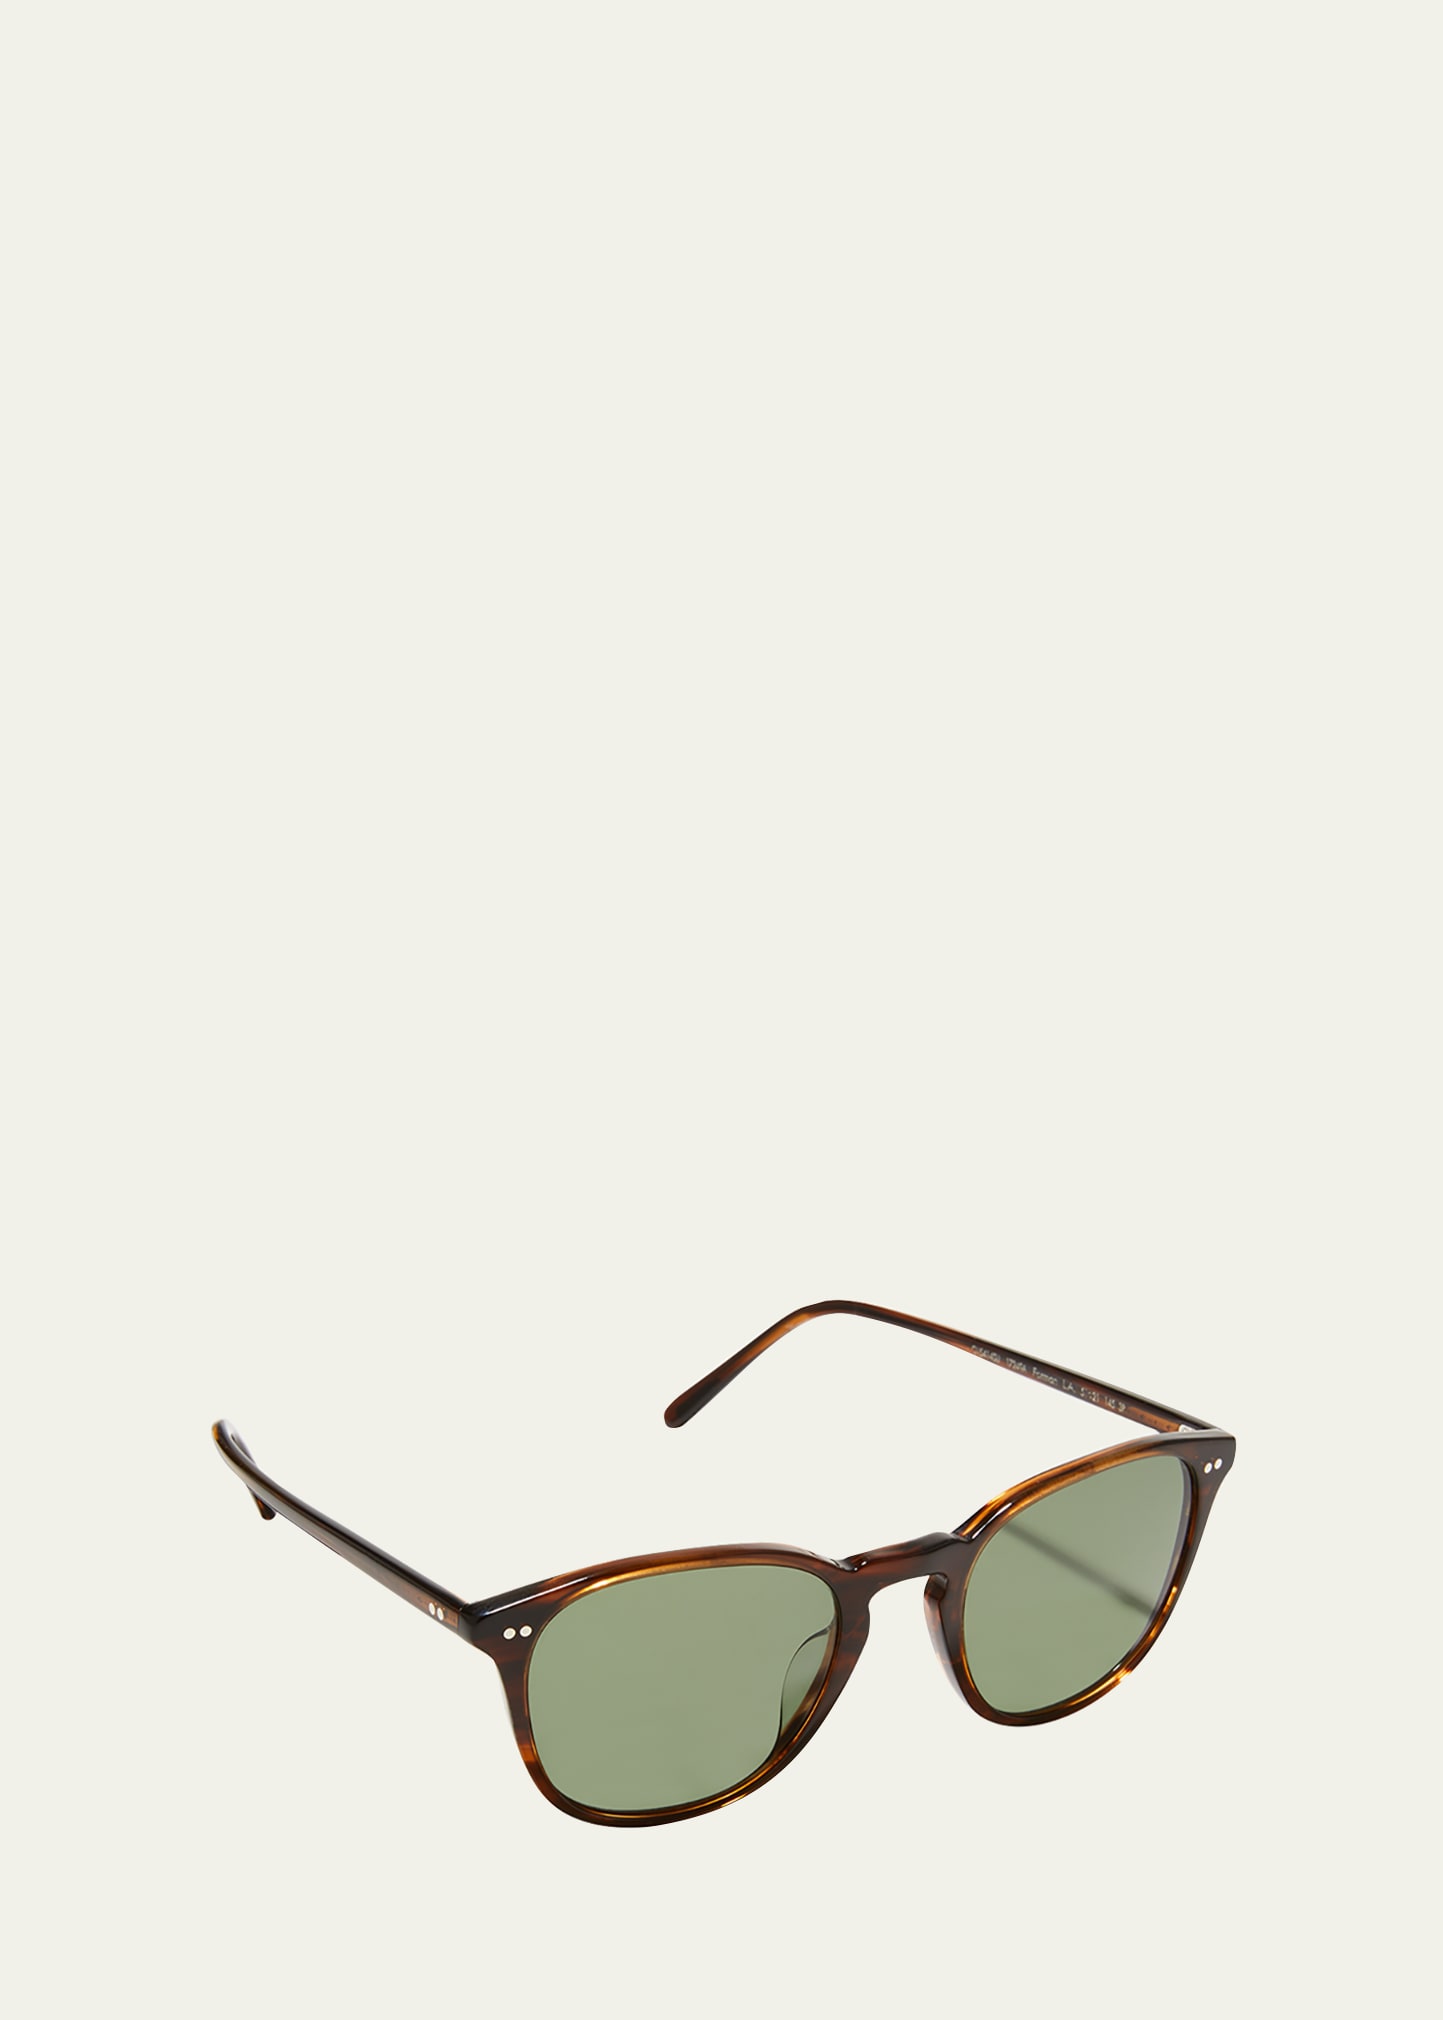 OLIVER PEOPLES MEN'S FORMAN L. A. ROUND ACETATE SUNGLASSES